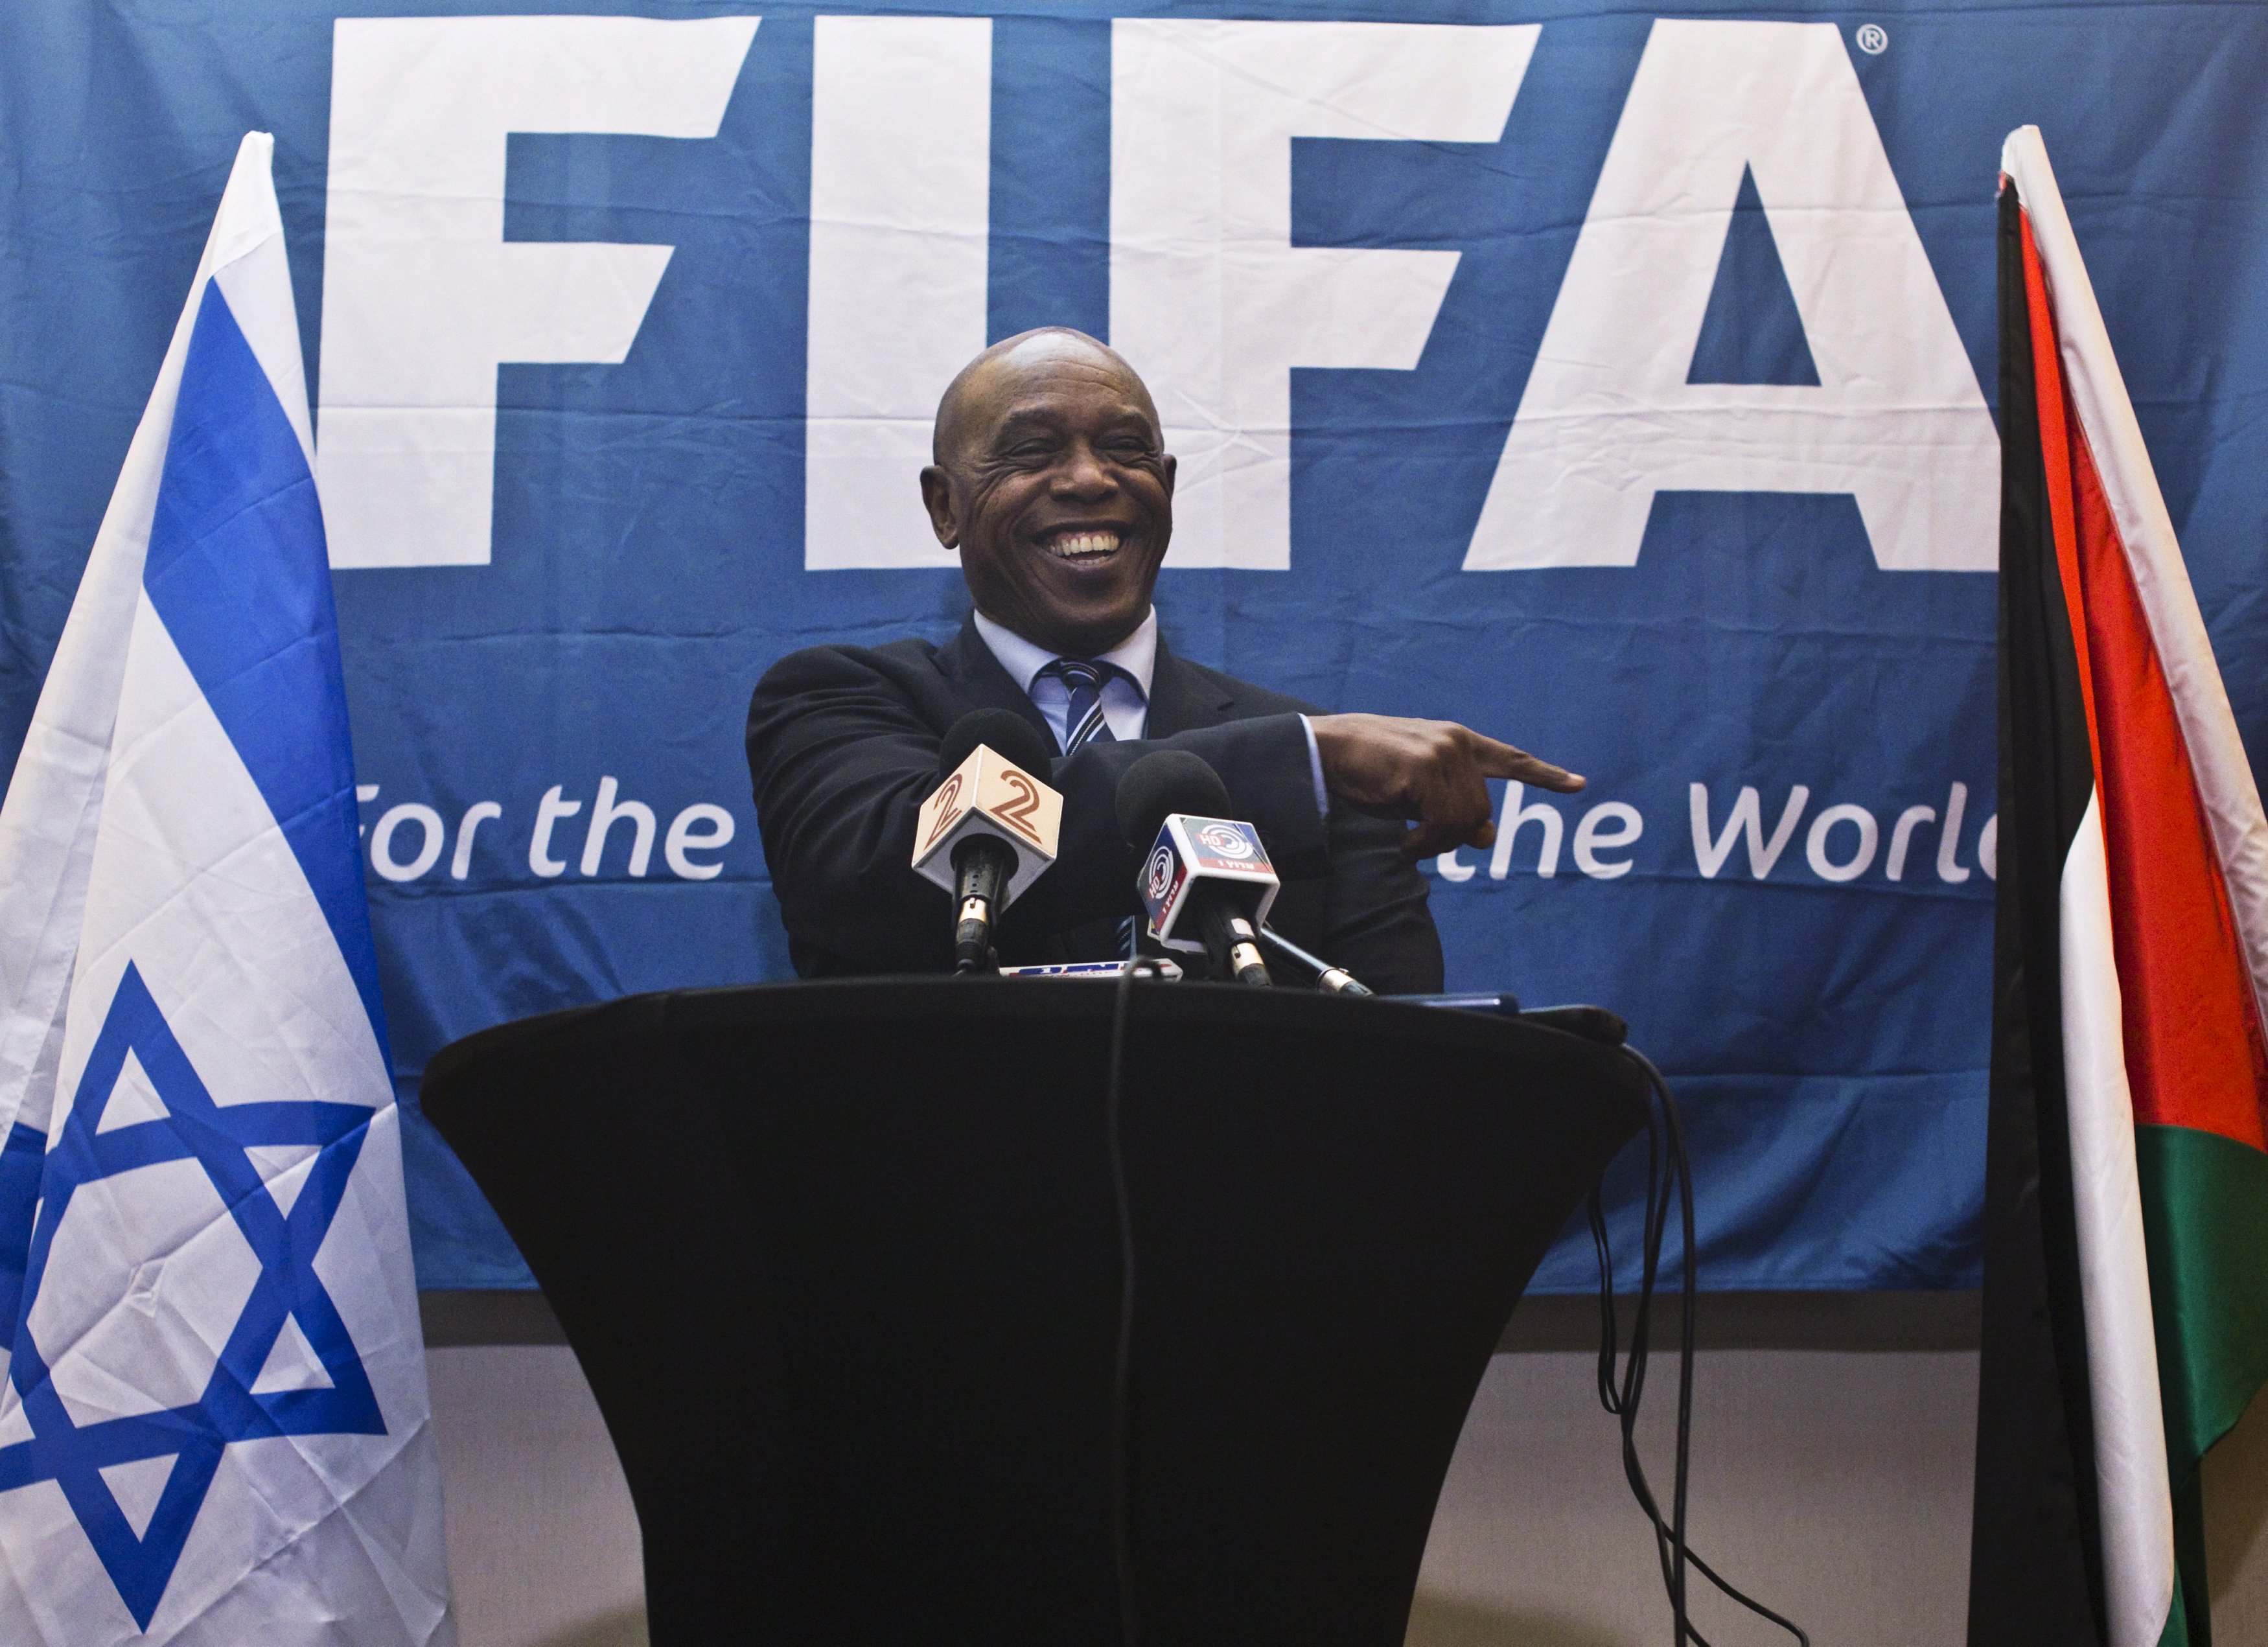 Tokyo Sexwale mediated a dispute between the Israeli and Palestinian soccer federations.